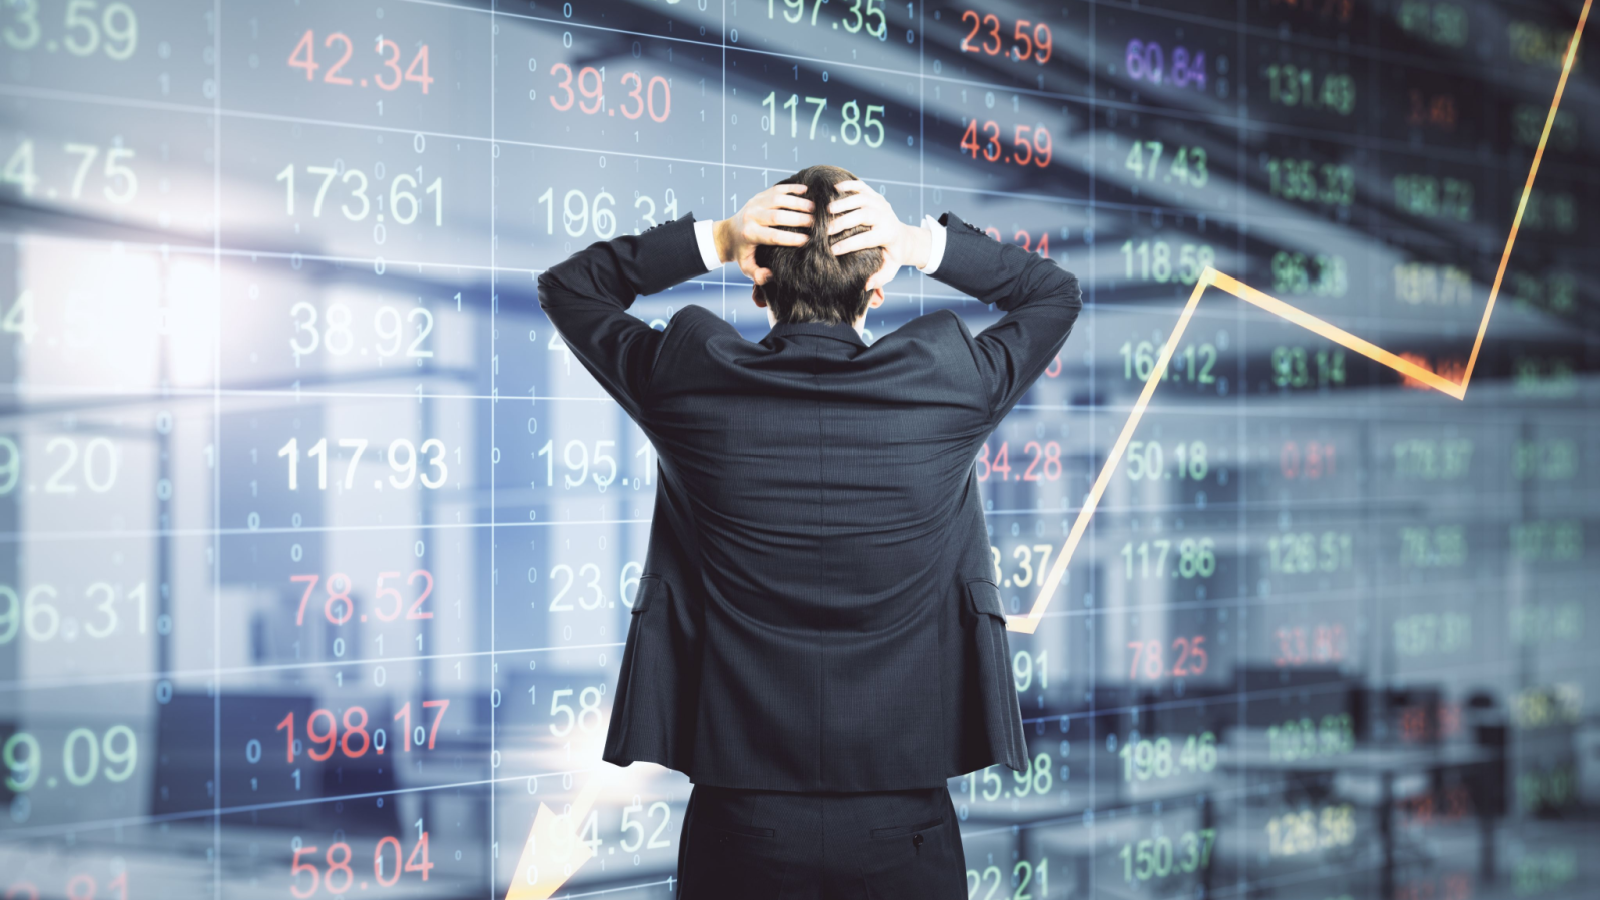 3 Stocks That Can Withstand a Brutal Stock Market Crash